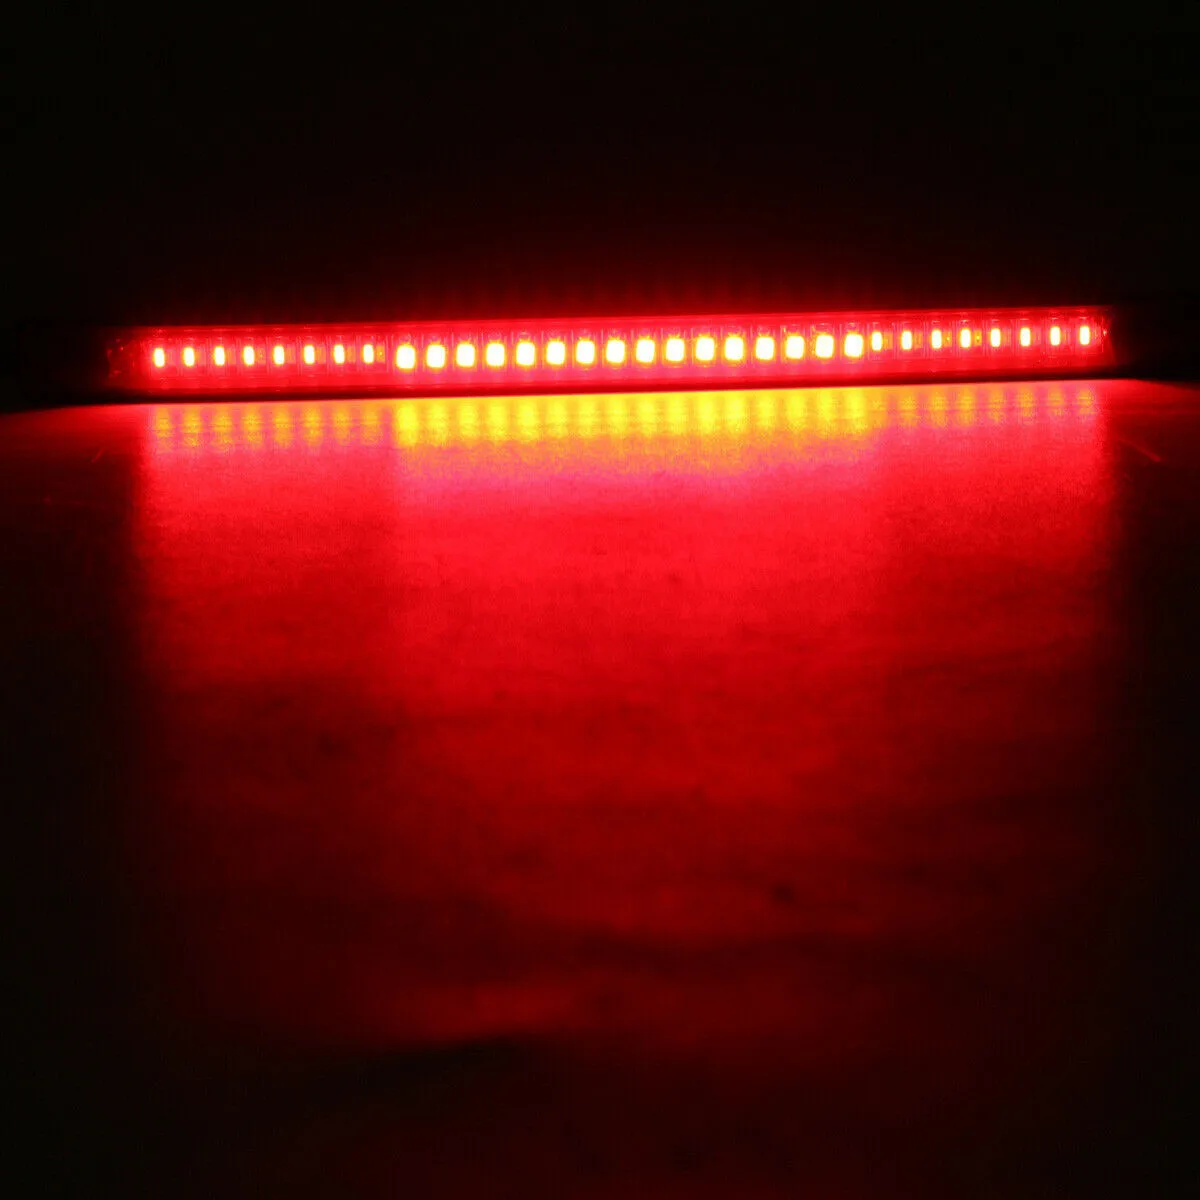 

Durable Practical 48LED Light Strip Flexible Universal Brake Stop DC 12V Lights Motorcycle Red Tail Turn Signal